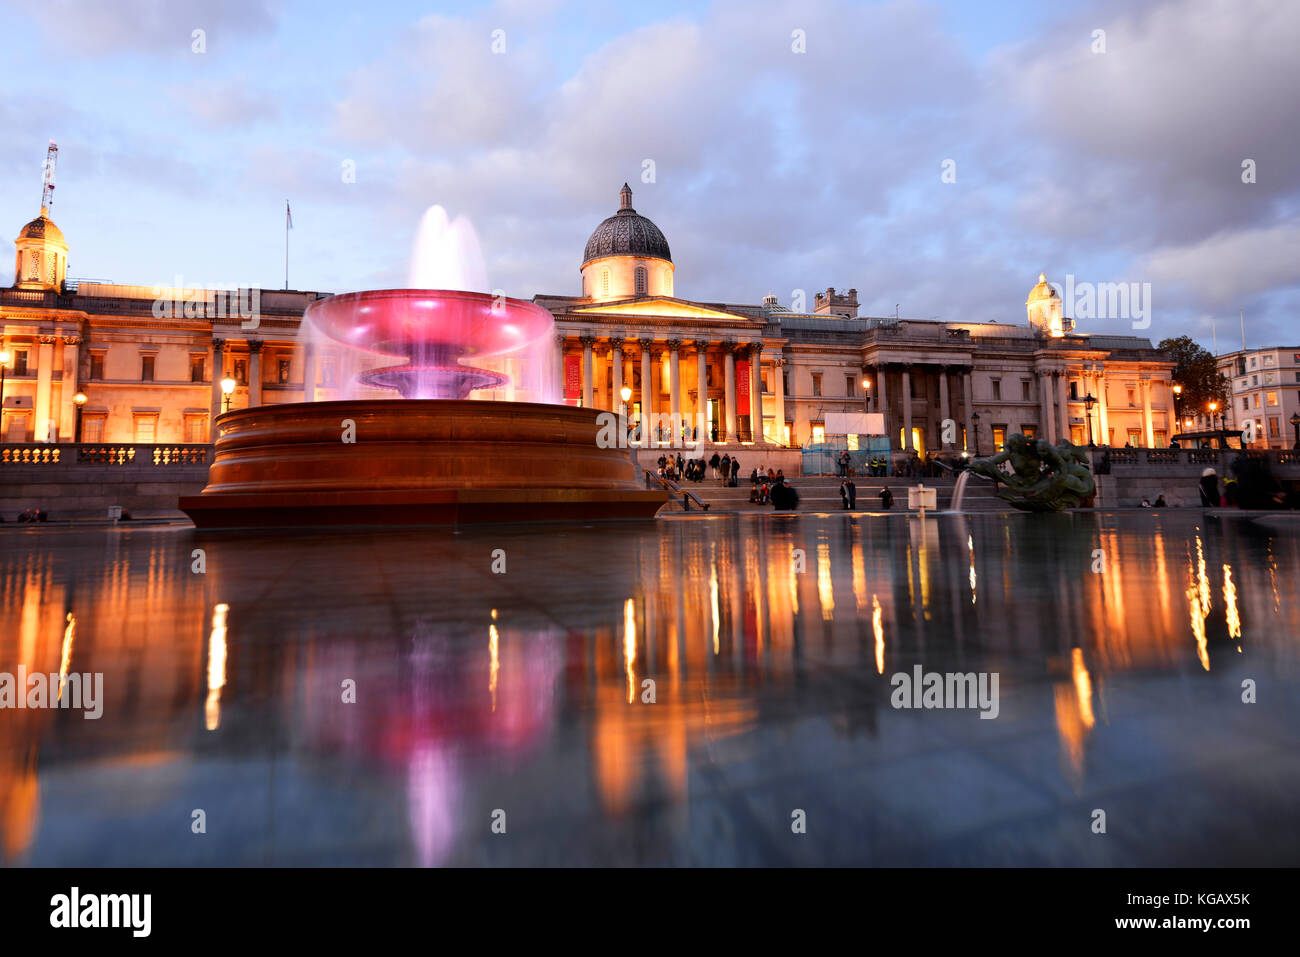 National Gallery in Trafalgar Square London with reflection in fountain water. Dusk, evening with lights, people Stock Photo